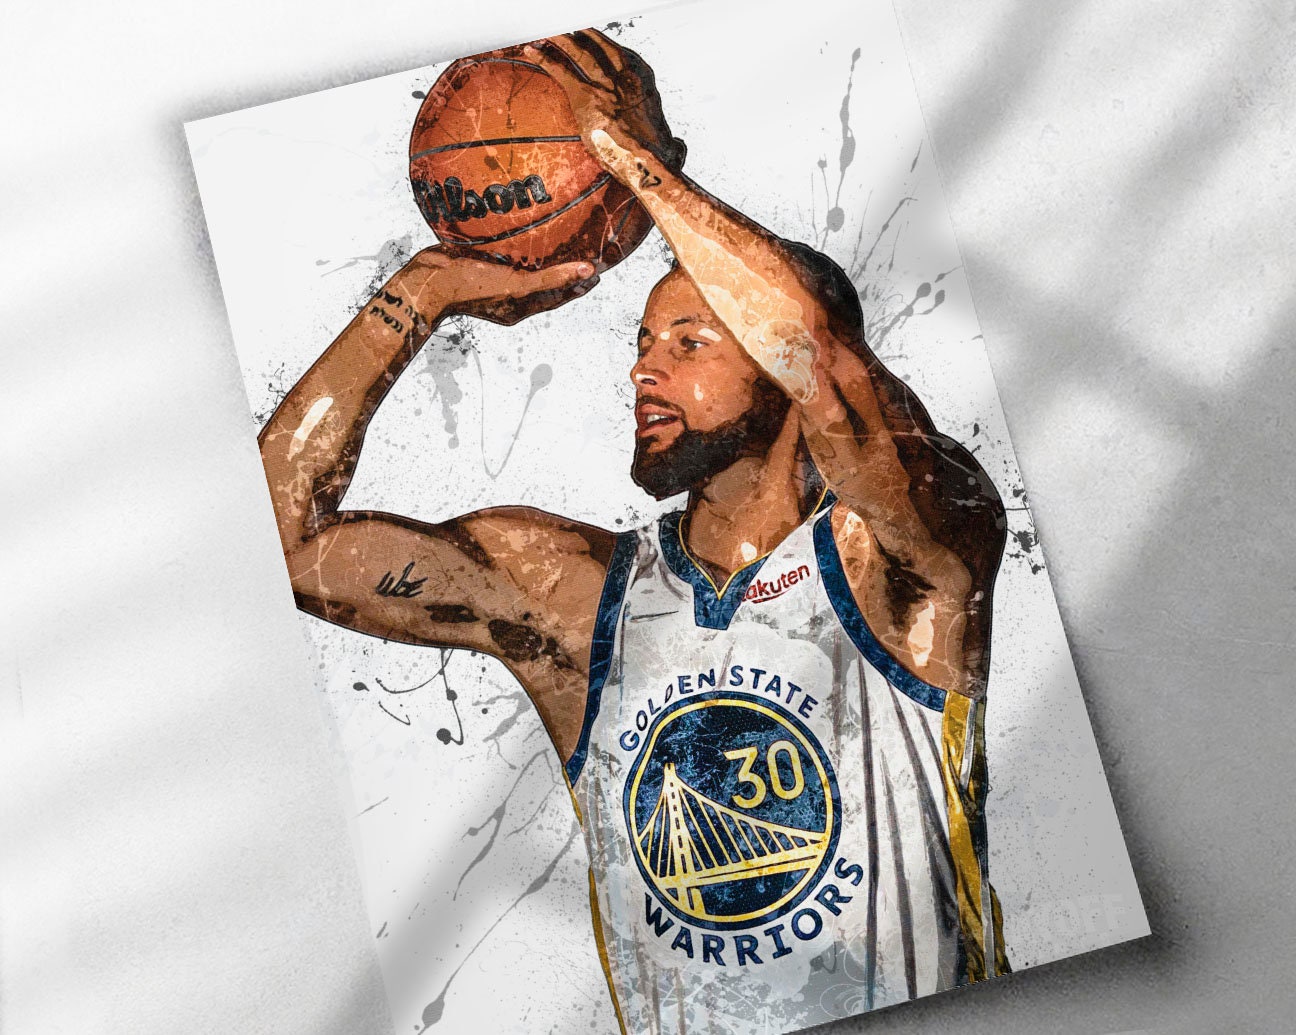 Stephen Curry Posters